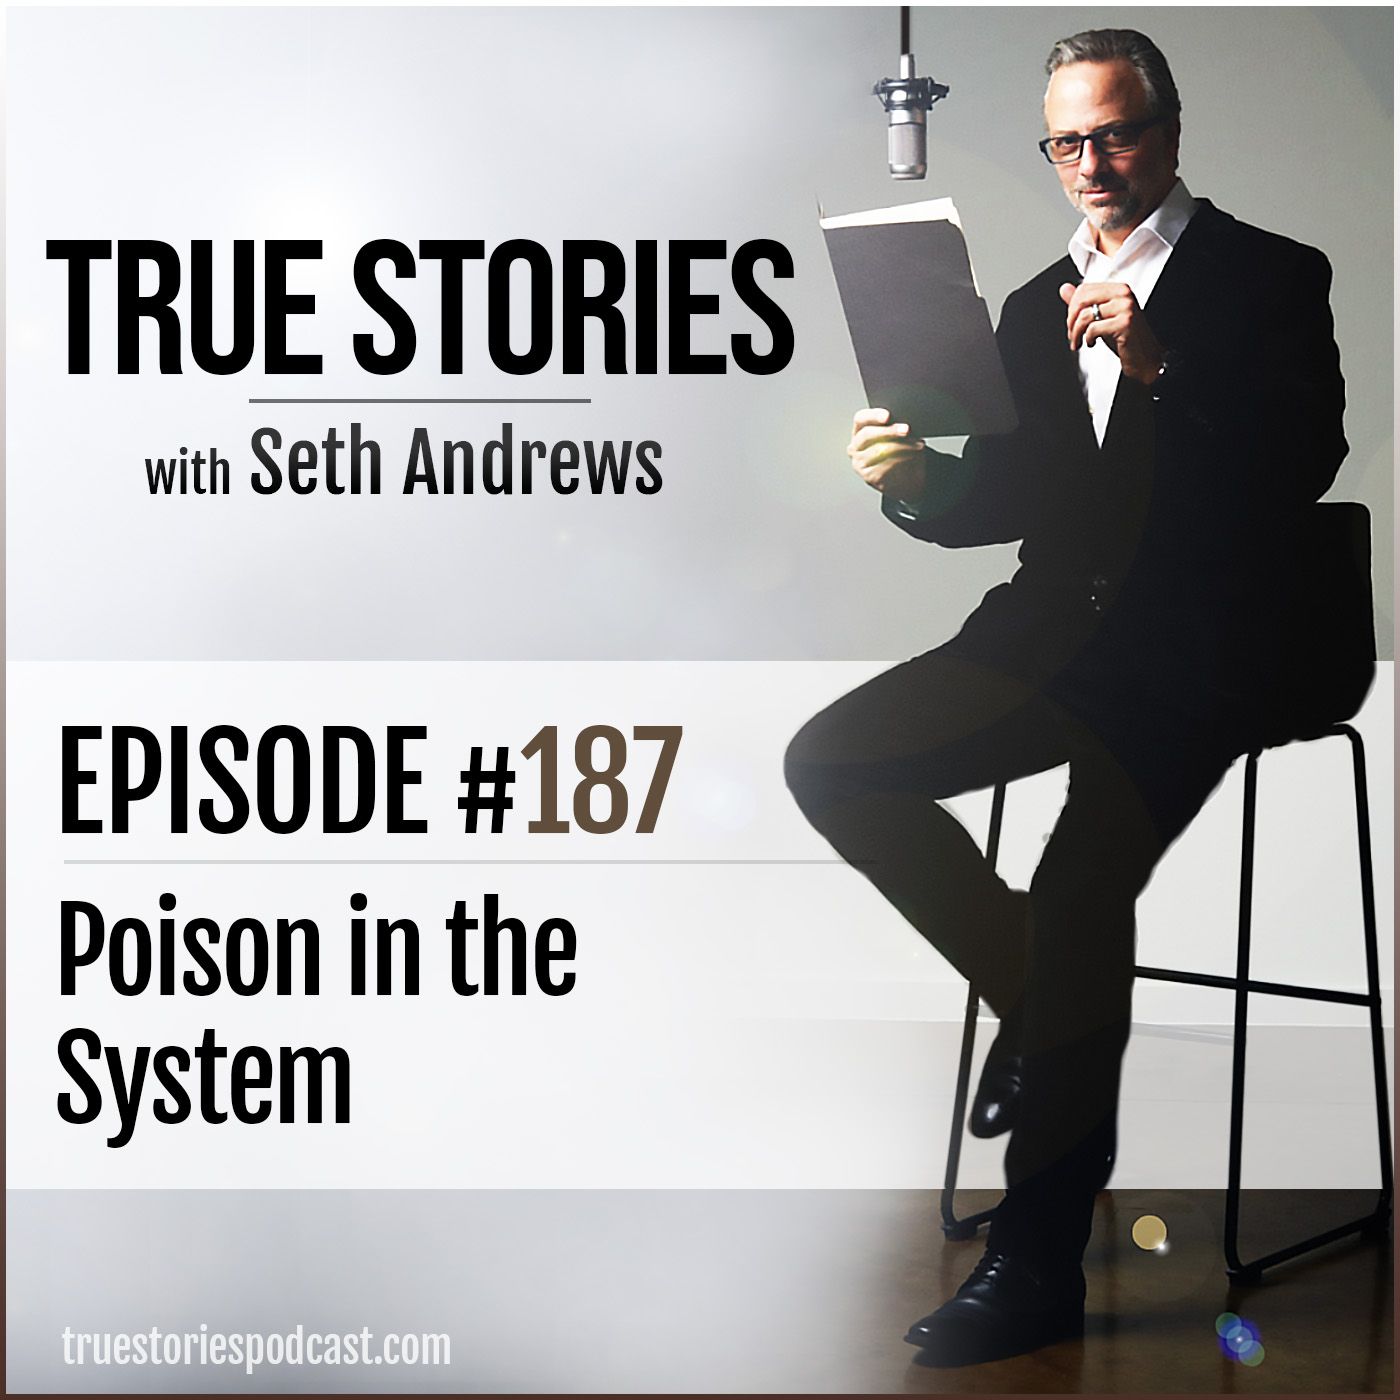 True Stories #187 - Poison in the System